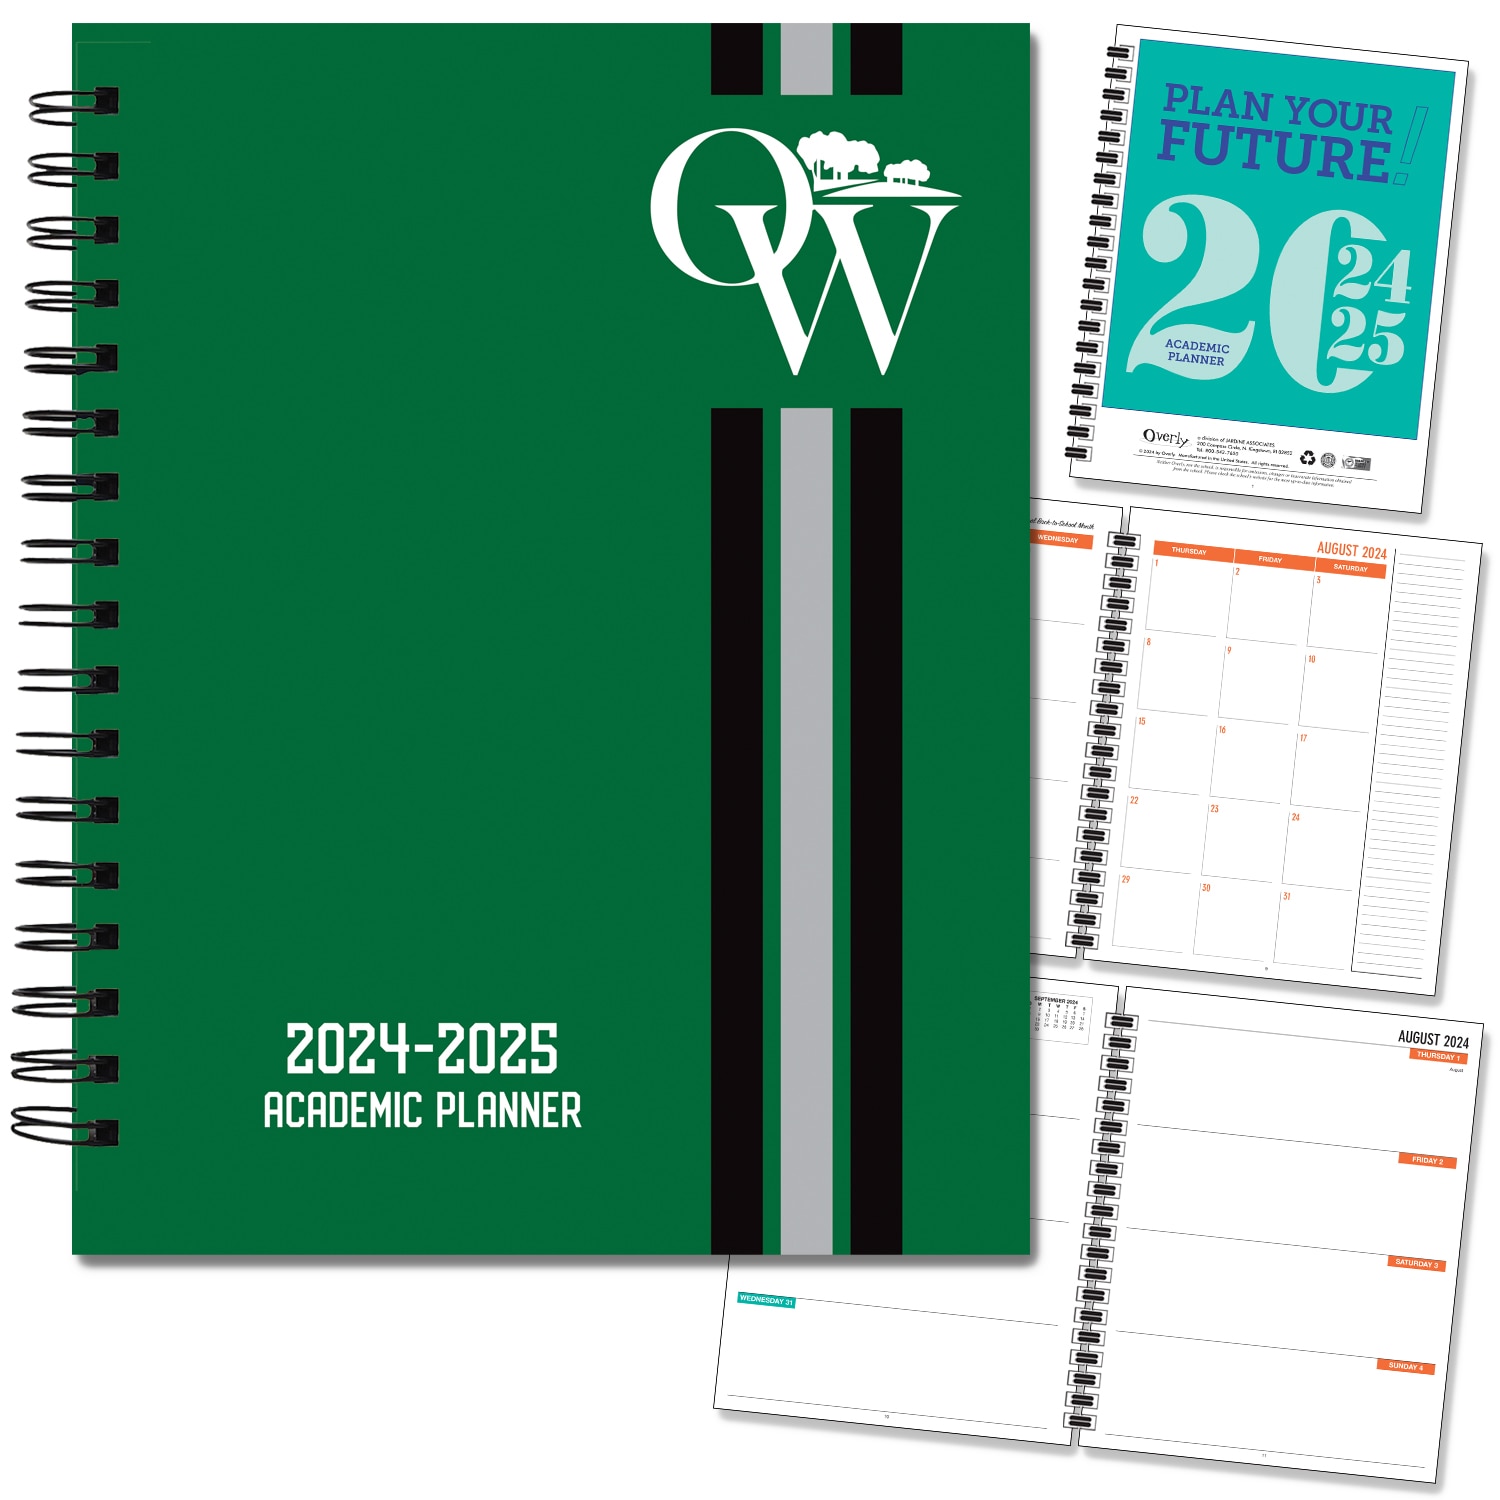 FY 25 Traditional Wordmark Hard Cover Imprinted Planner 24-25 AY 7x9